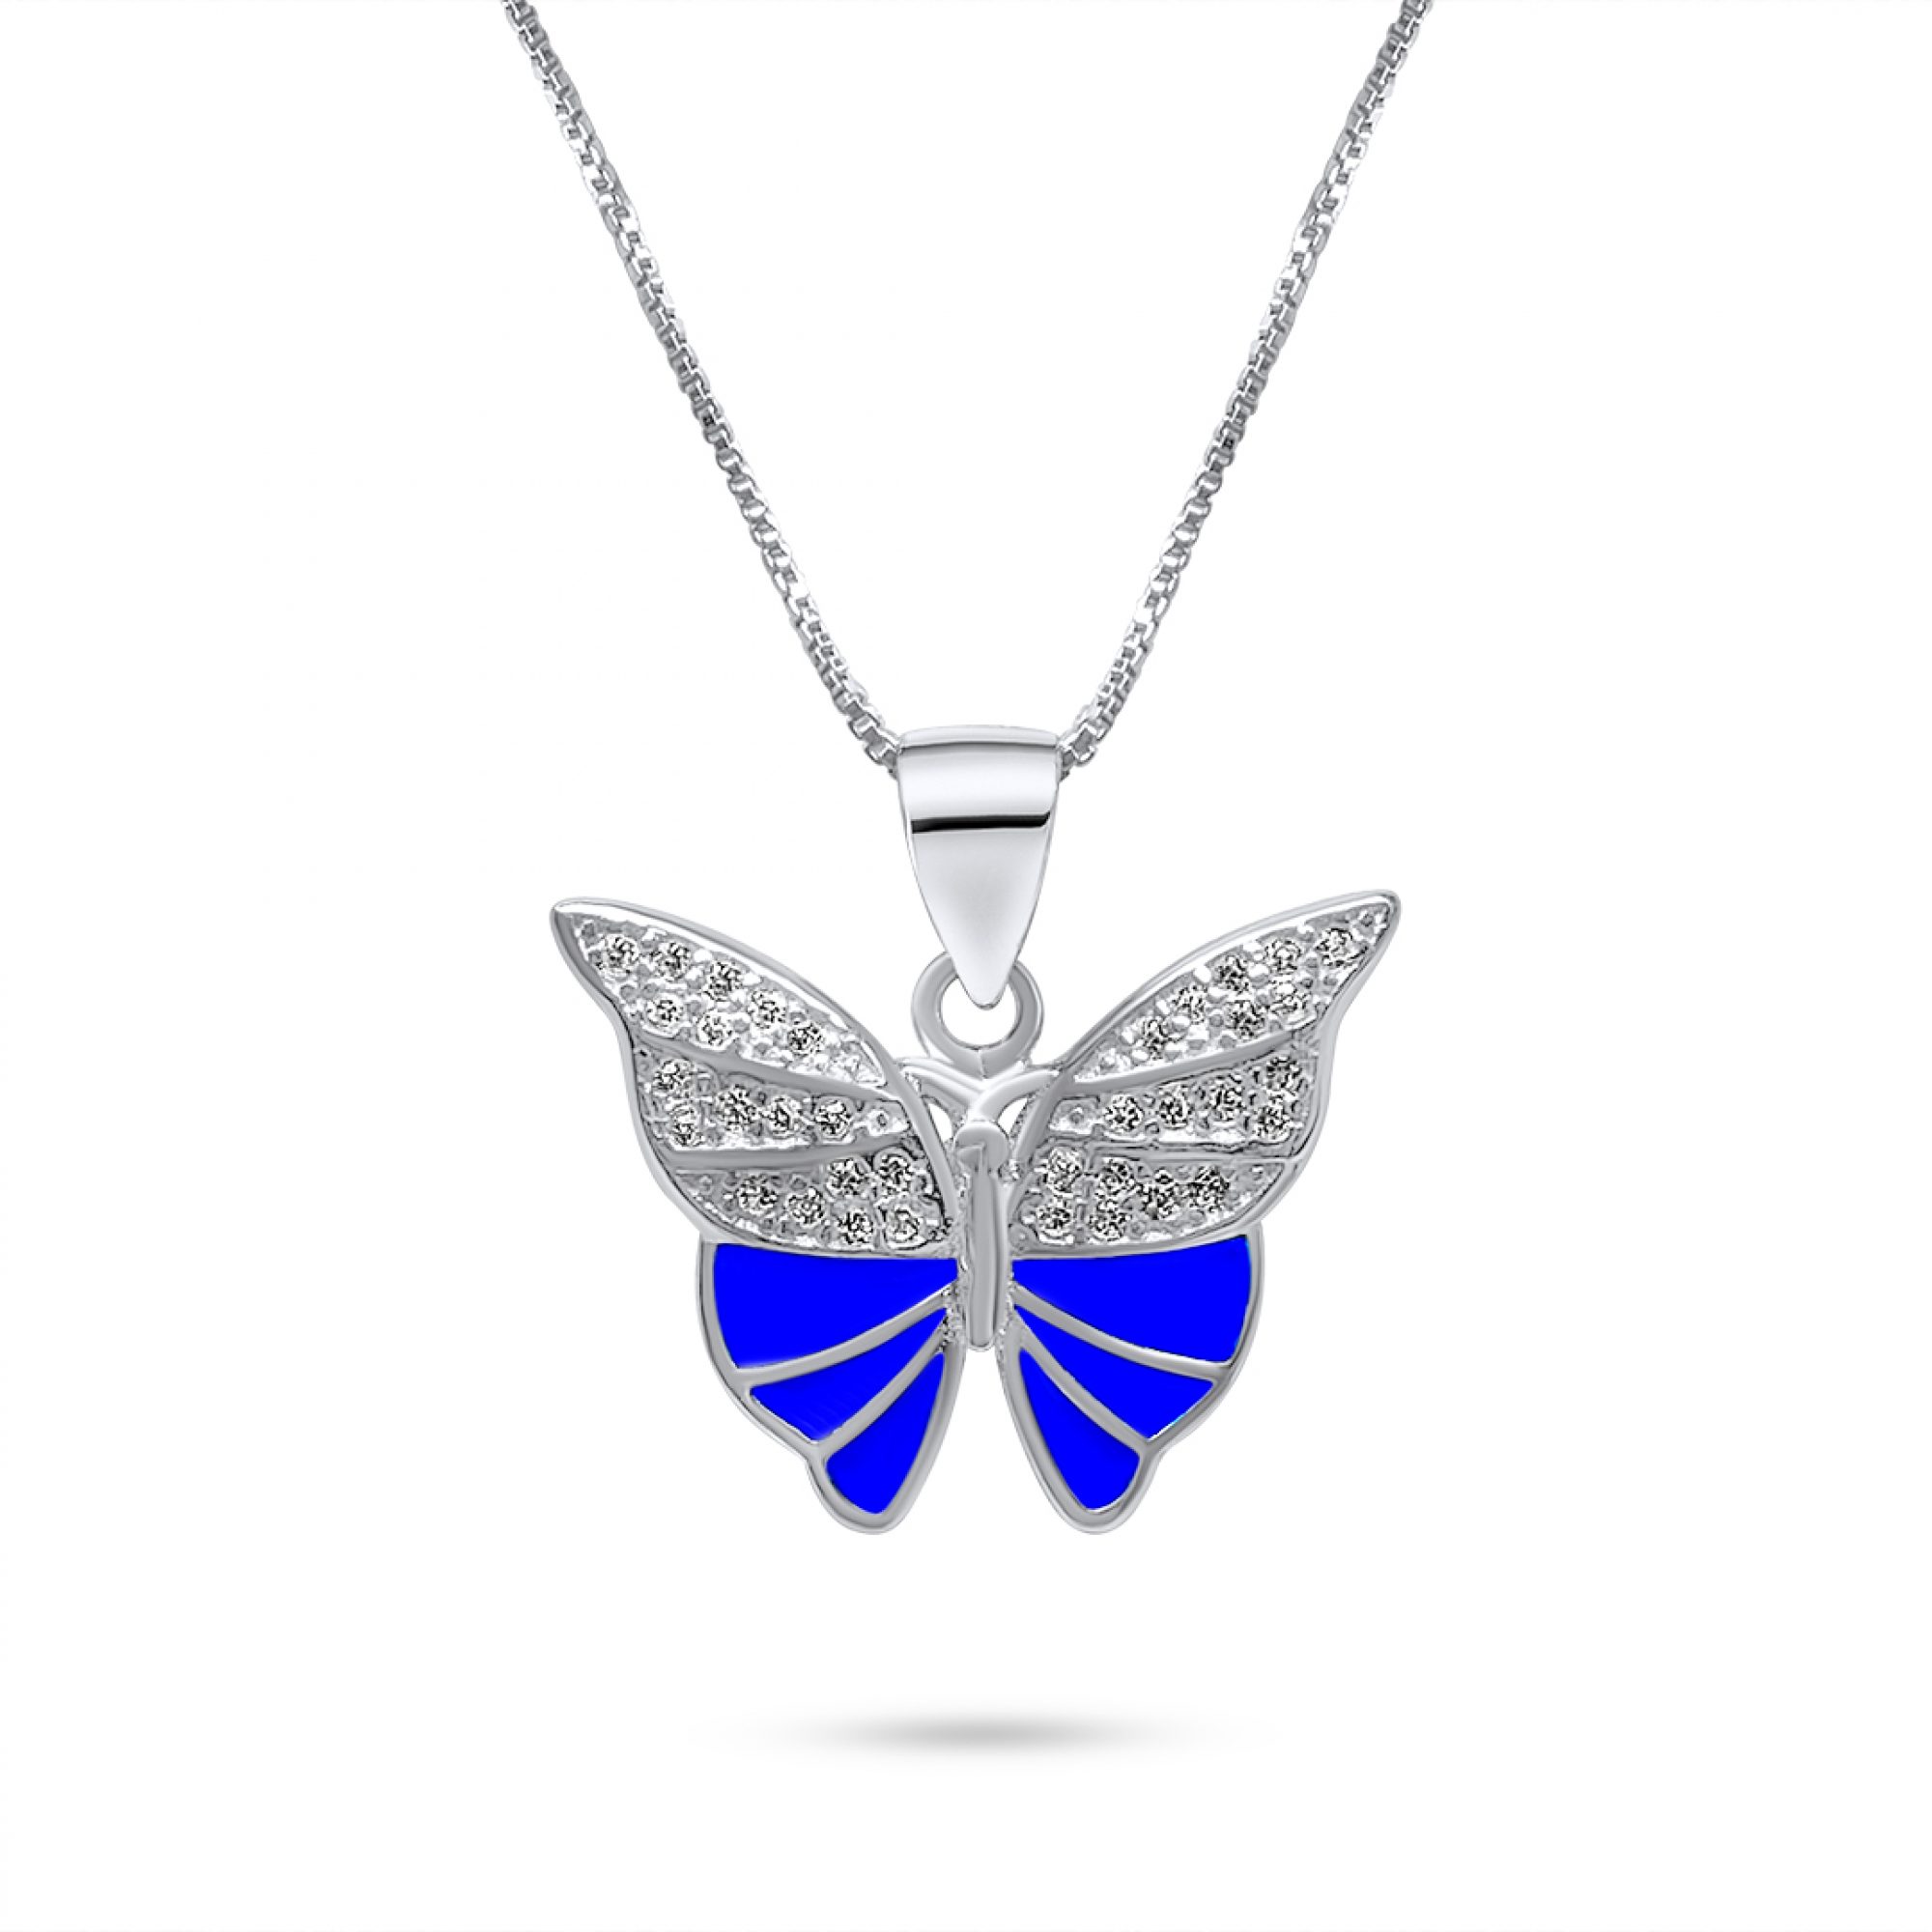 Butterfly necklace with zircon stones and enamel